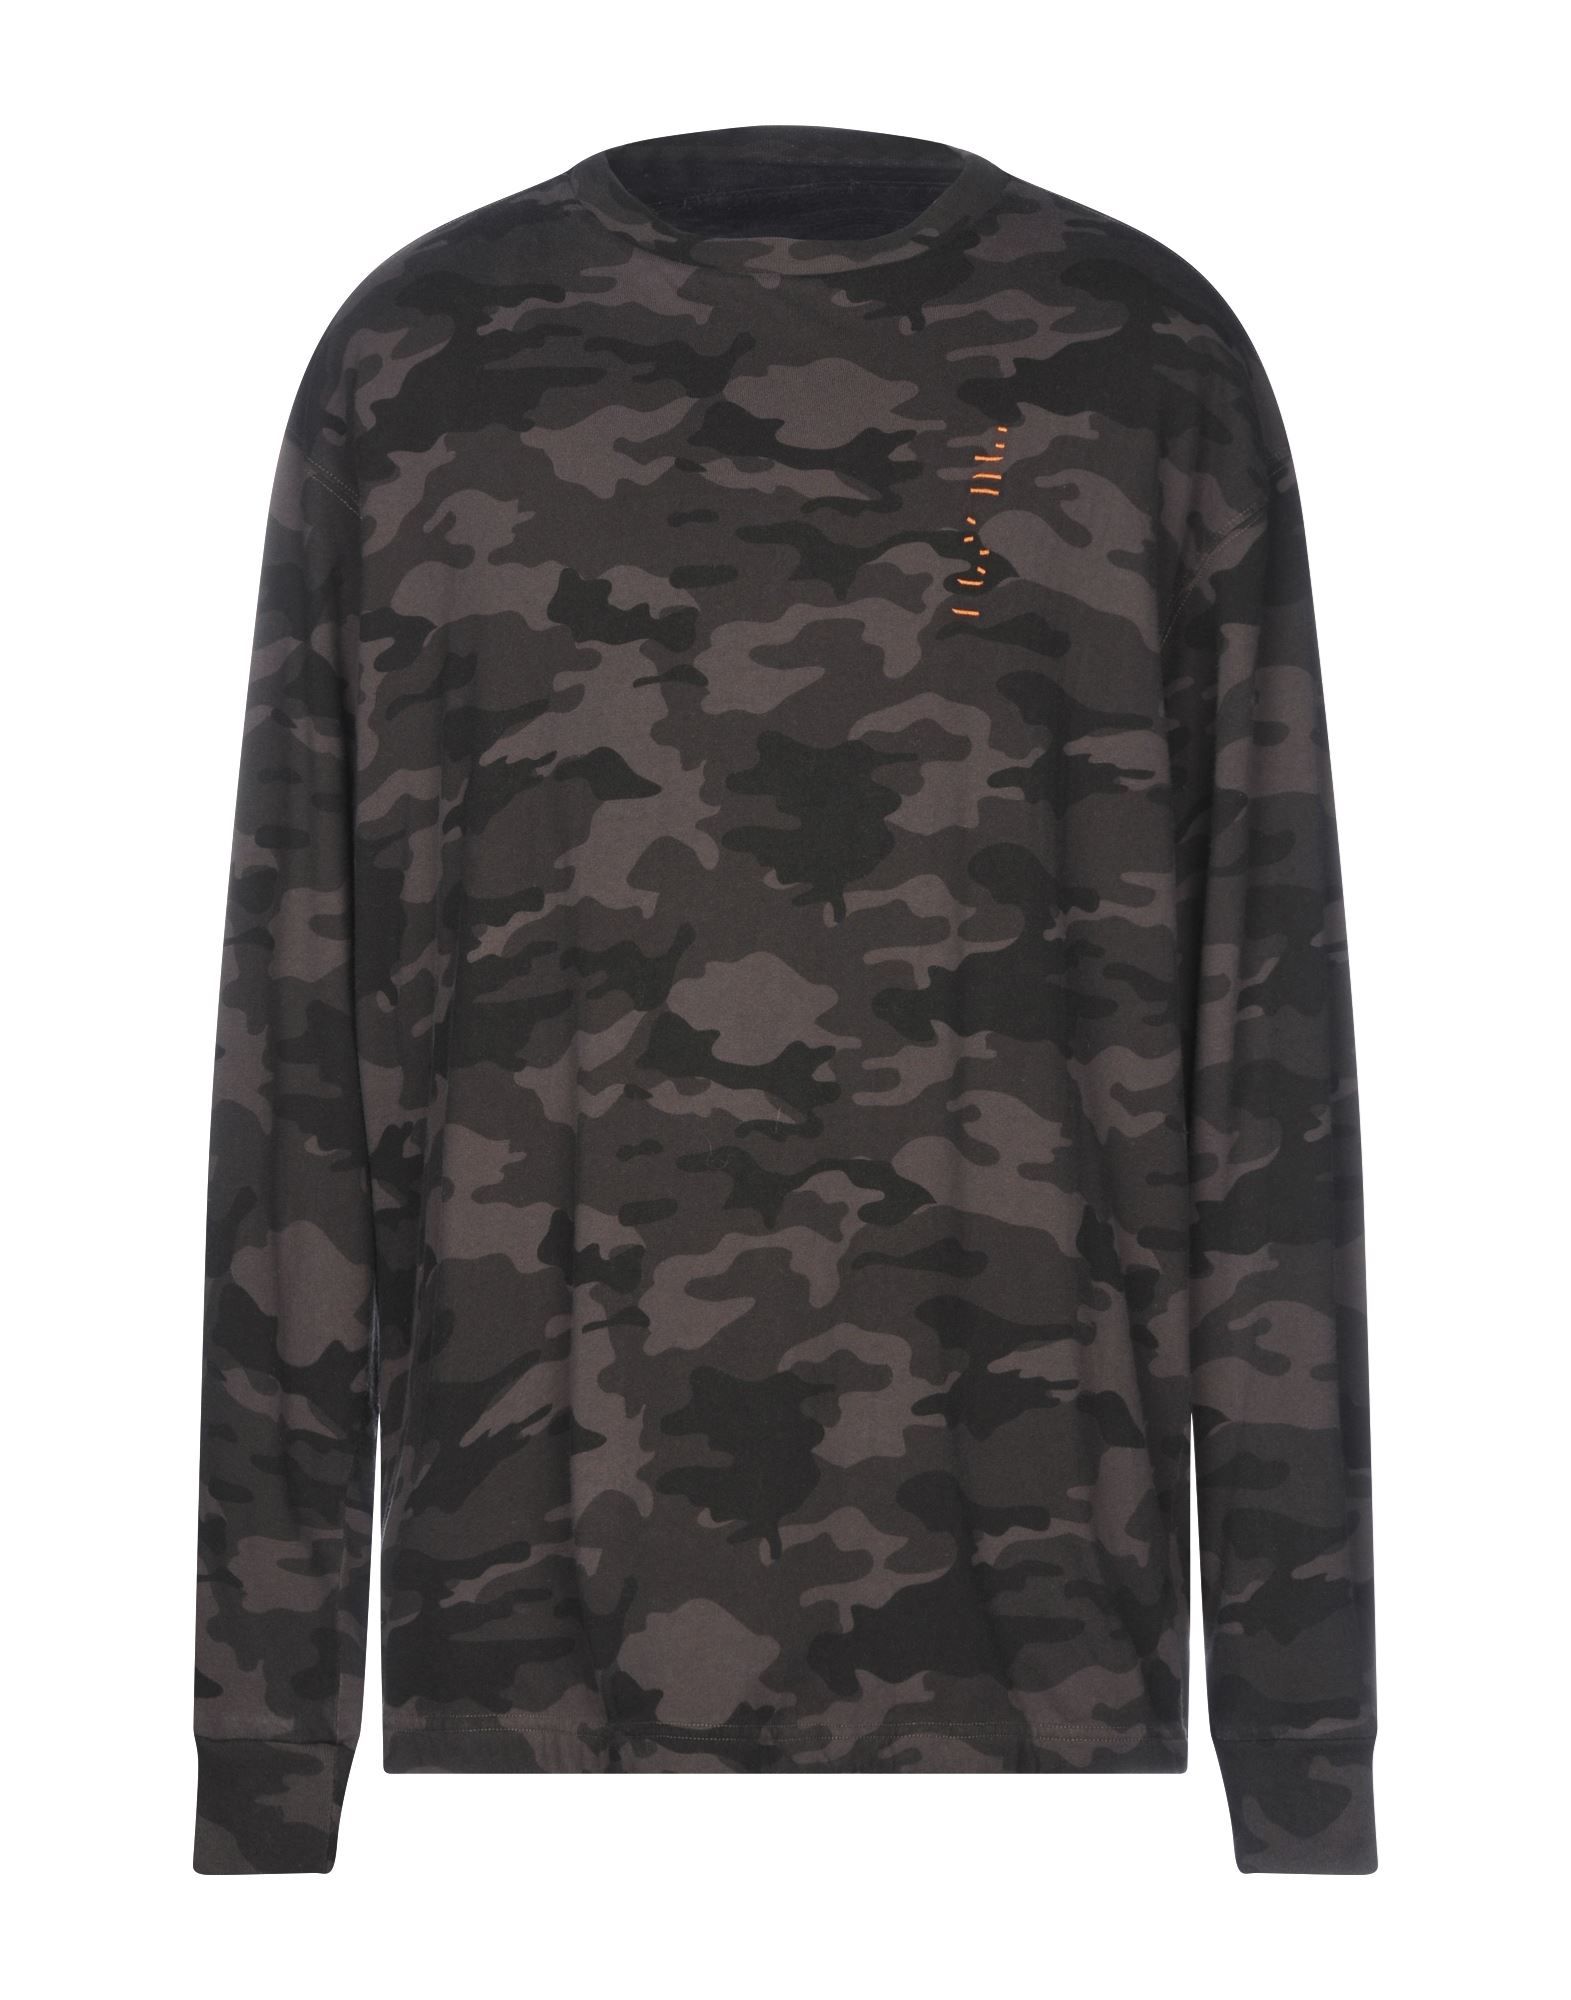 embroidered detailing, logo, camouflage, round collar, long sleeves, no pockets